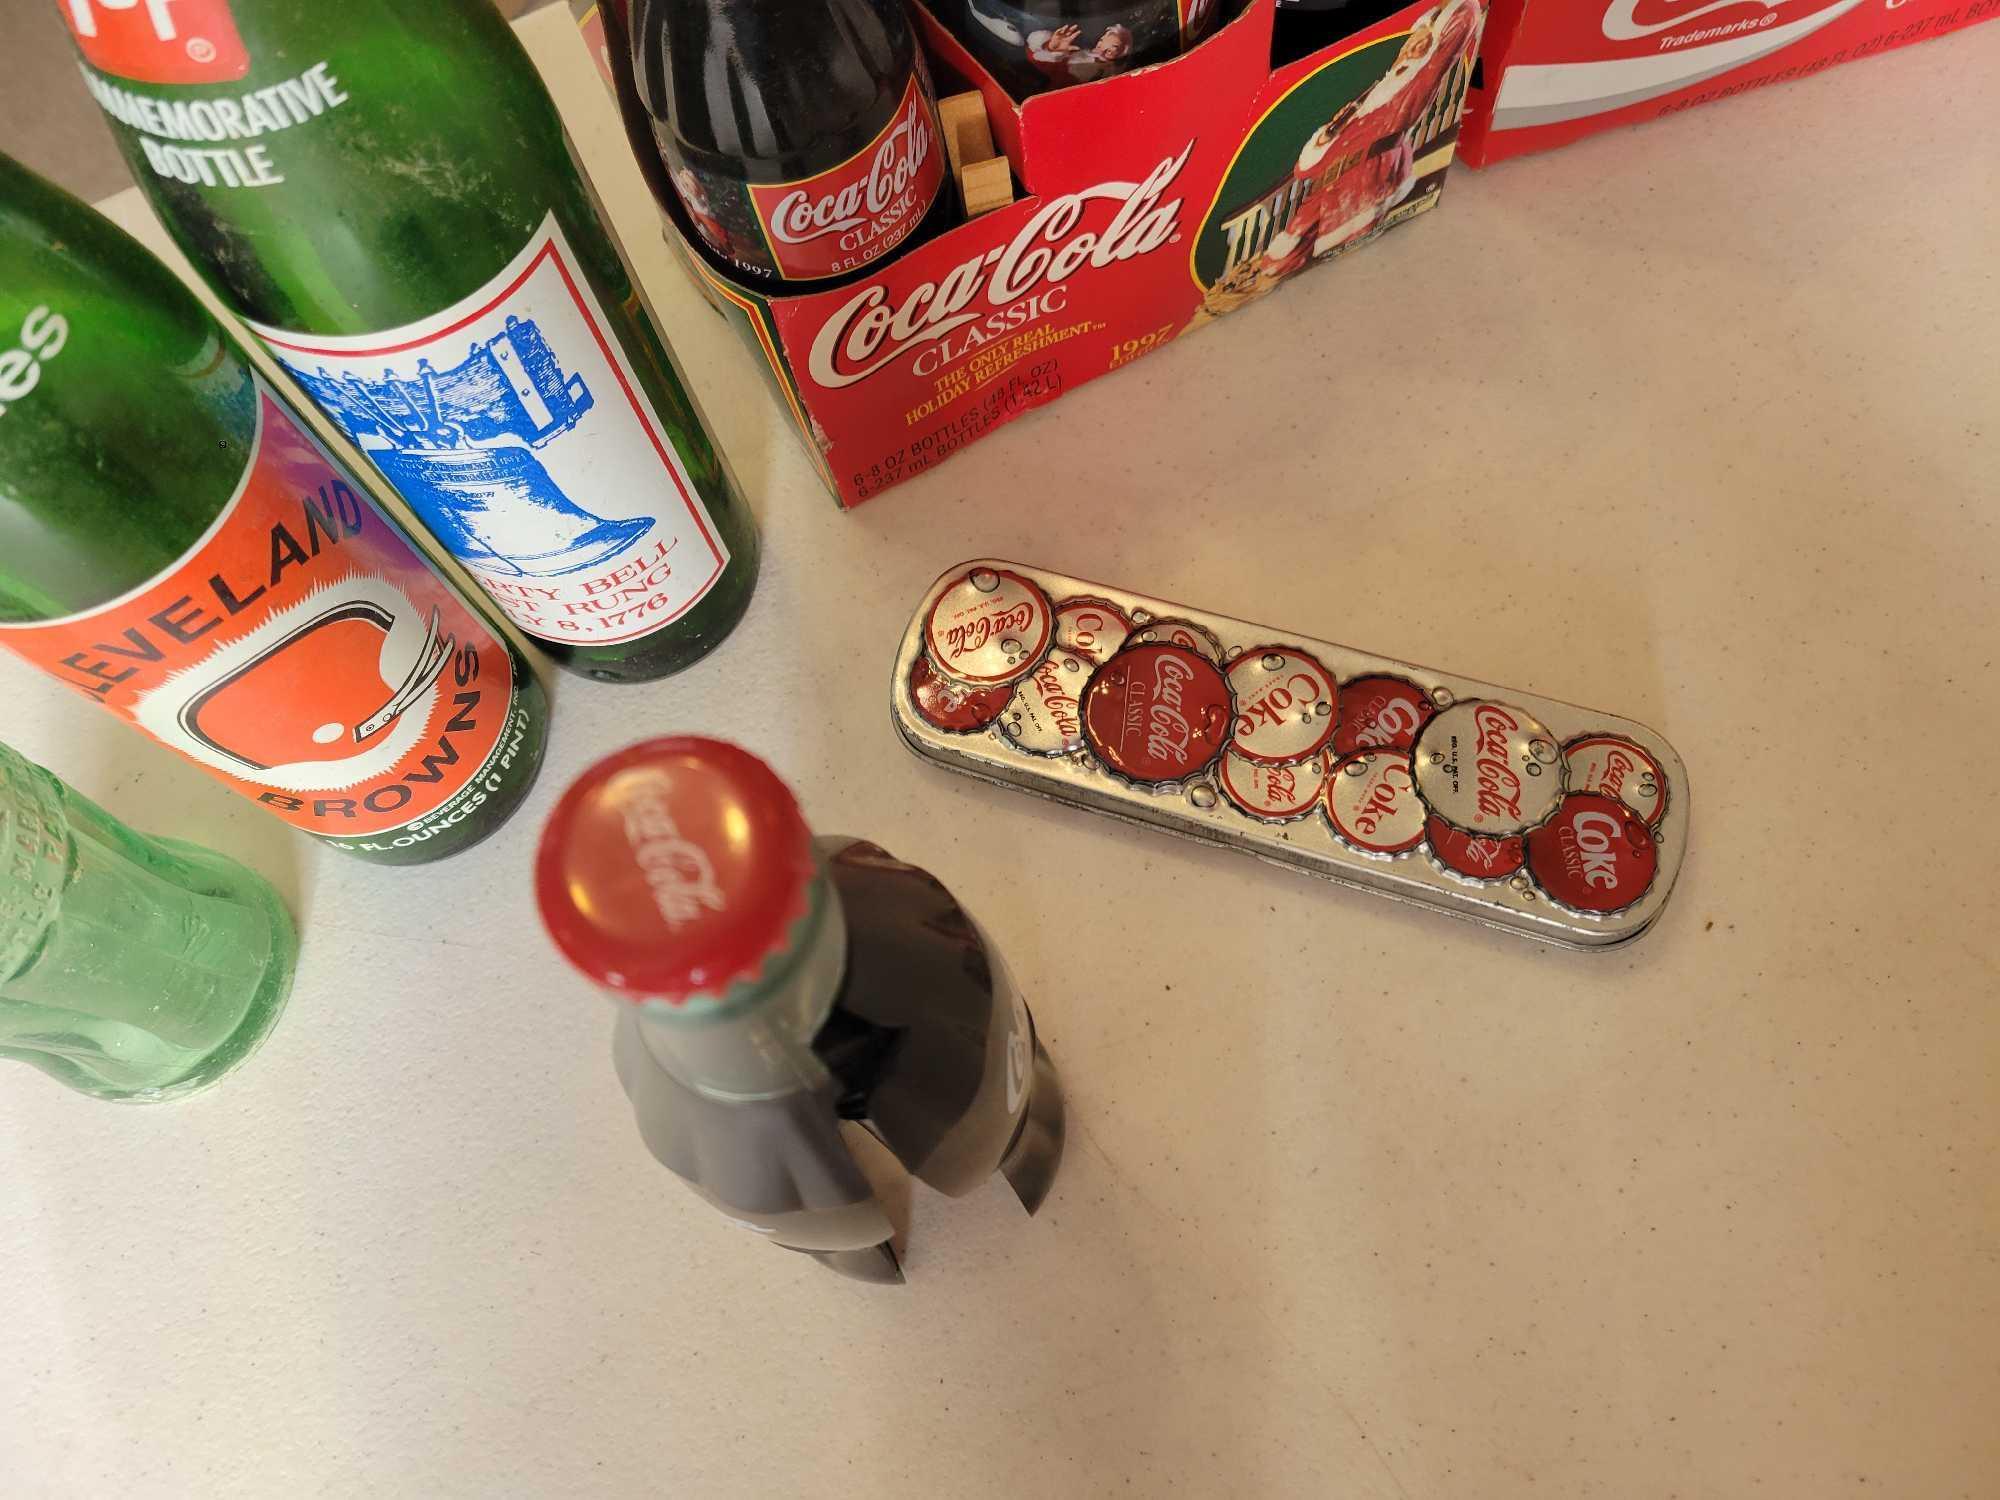 Collectible Coca Cola bottles, 7Up, Coke lamp and decor